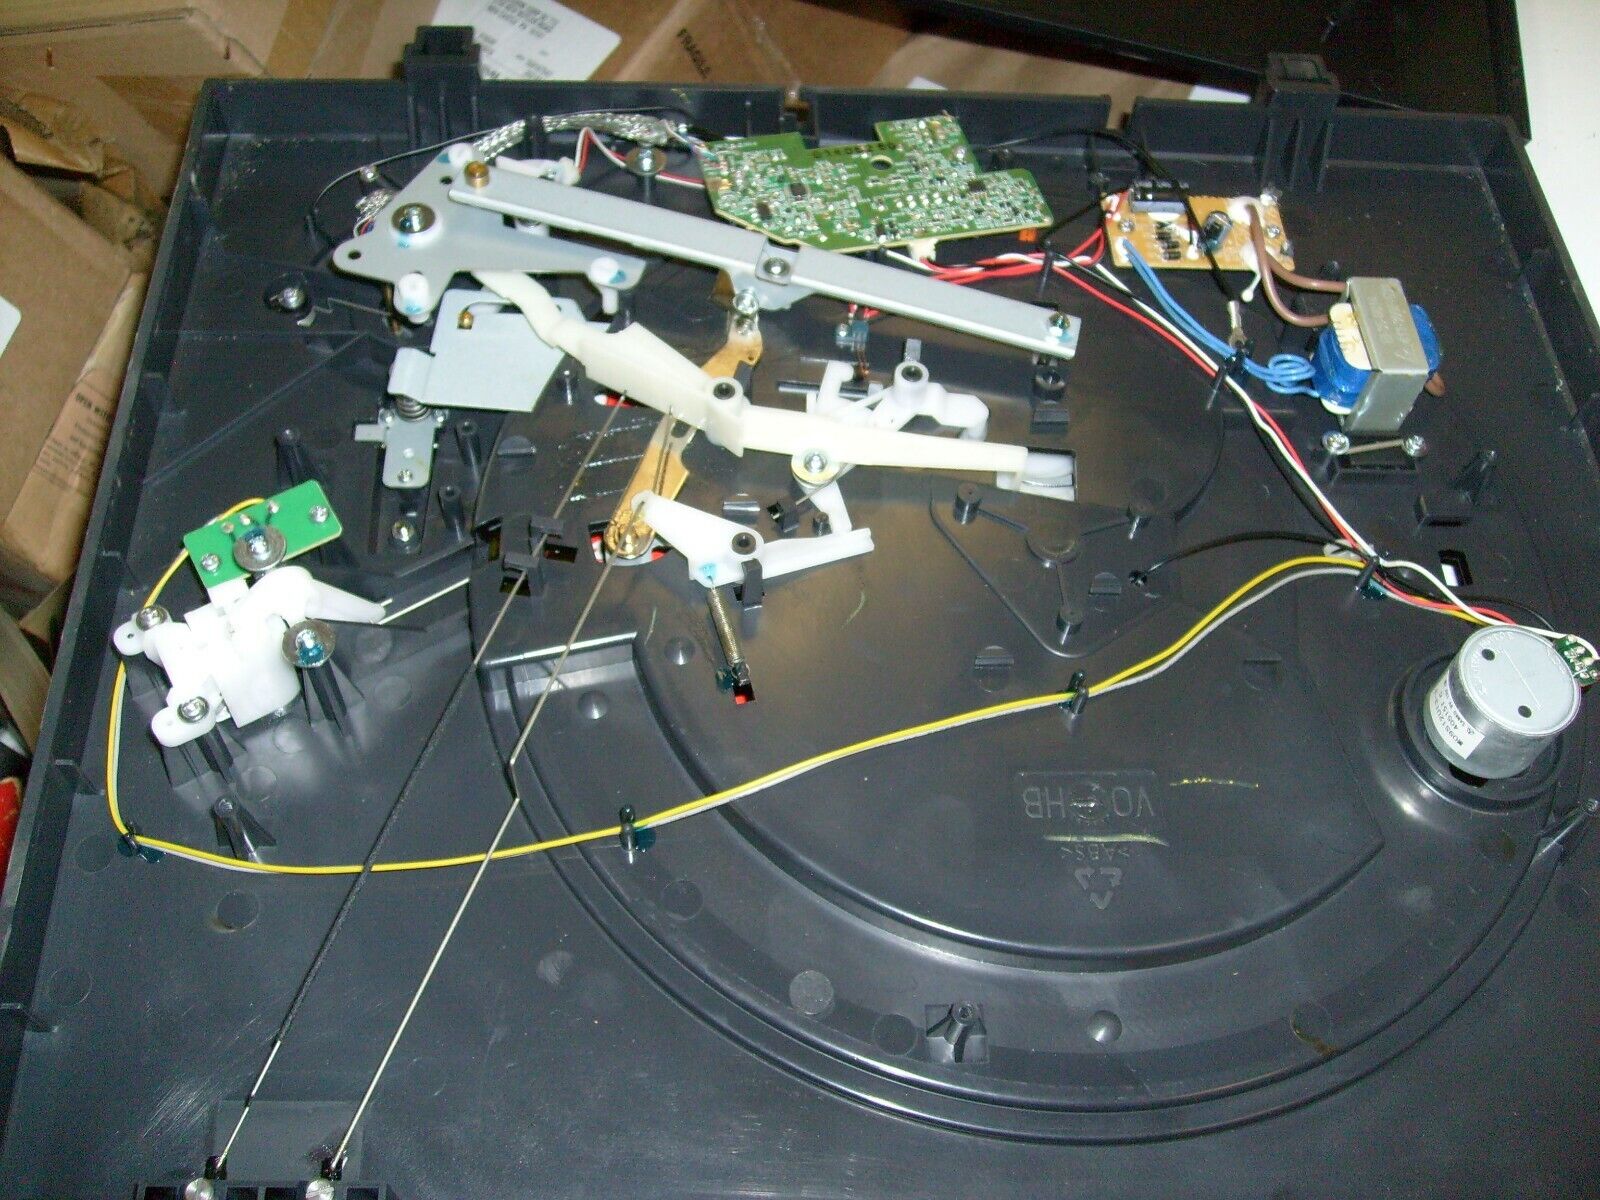 DENON TURNTABLE DP-300F - ONE ORIGINAL  CHASSIS FOR PARTS MOTOR GEAR BUTTON